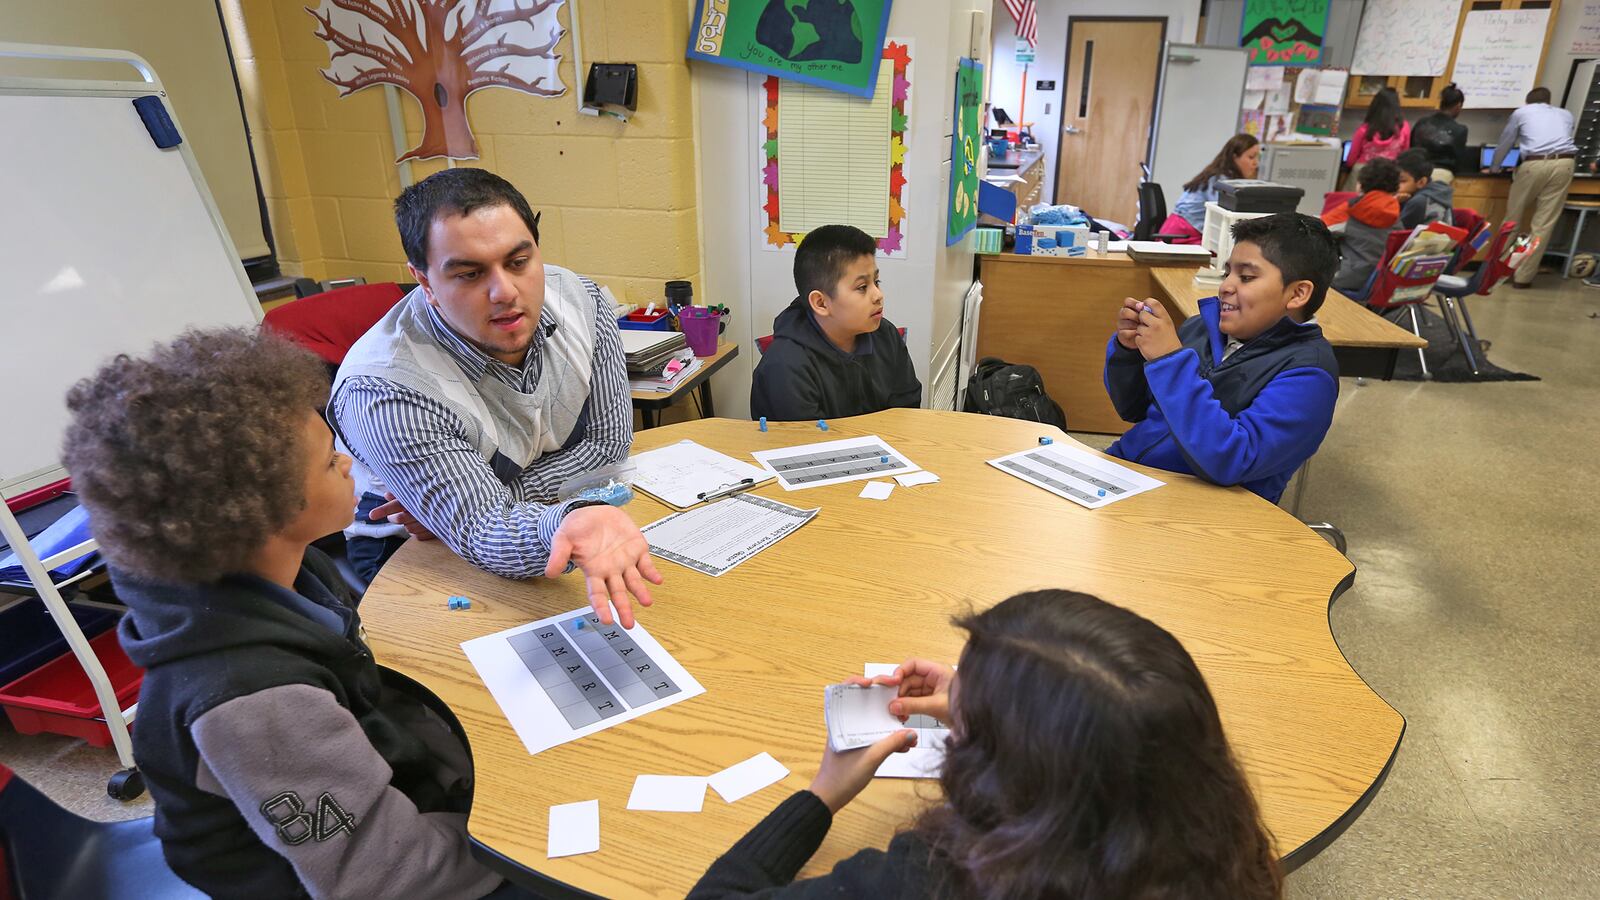 Fourth grade instructional aid Henry Velasquez works with students at Enlace Academy. More than half of the school's students are English learners.